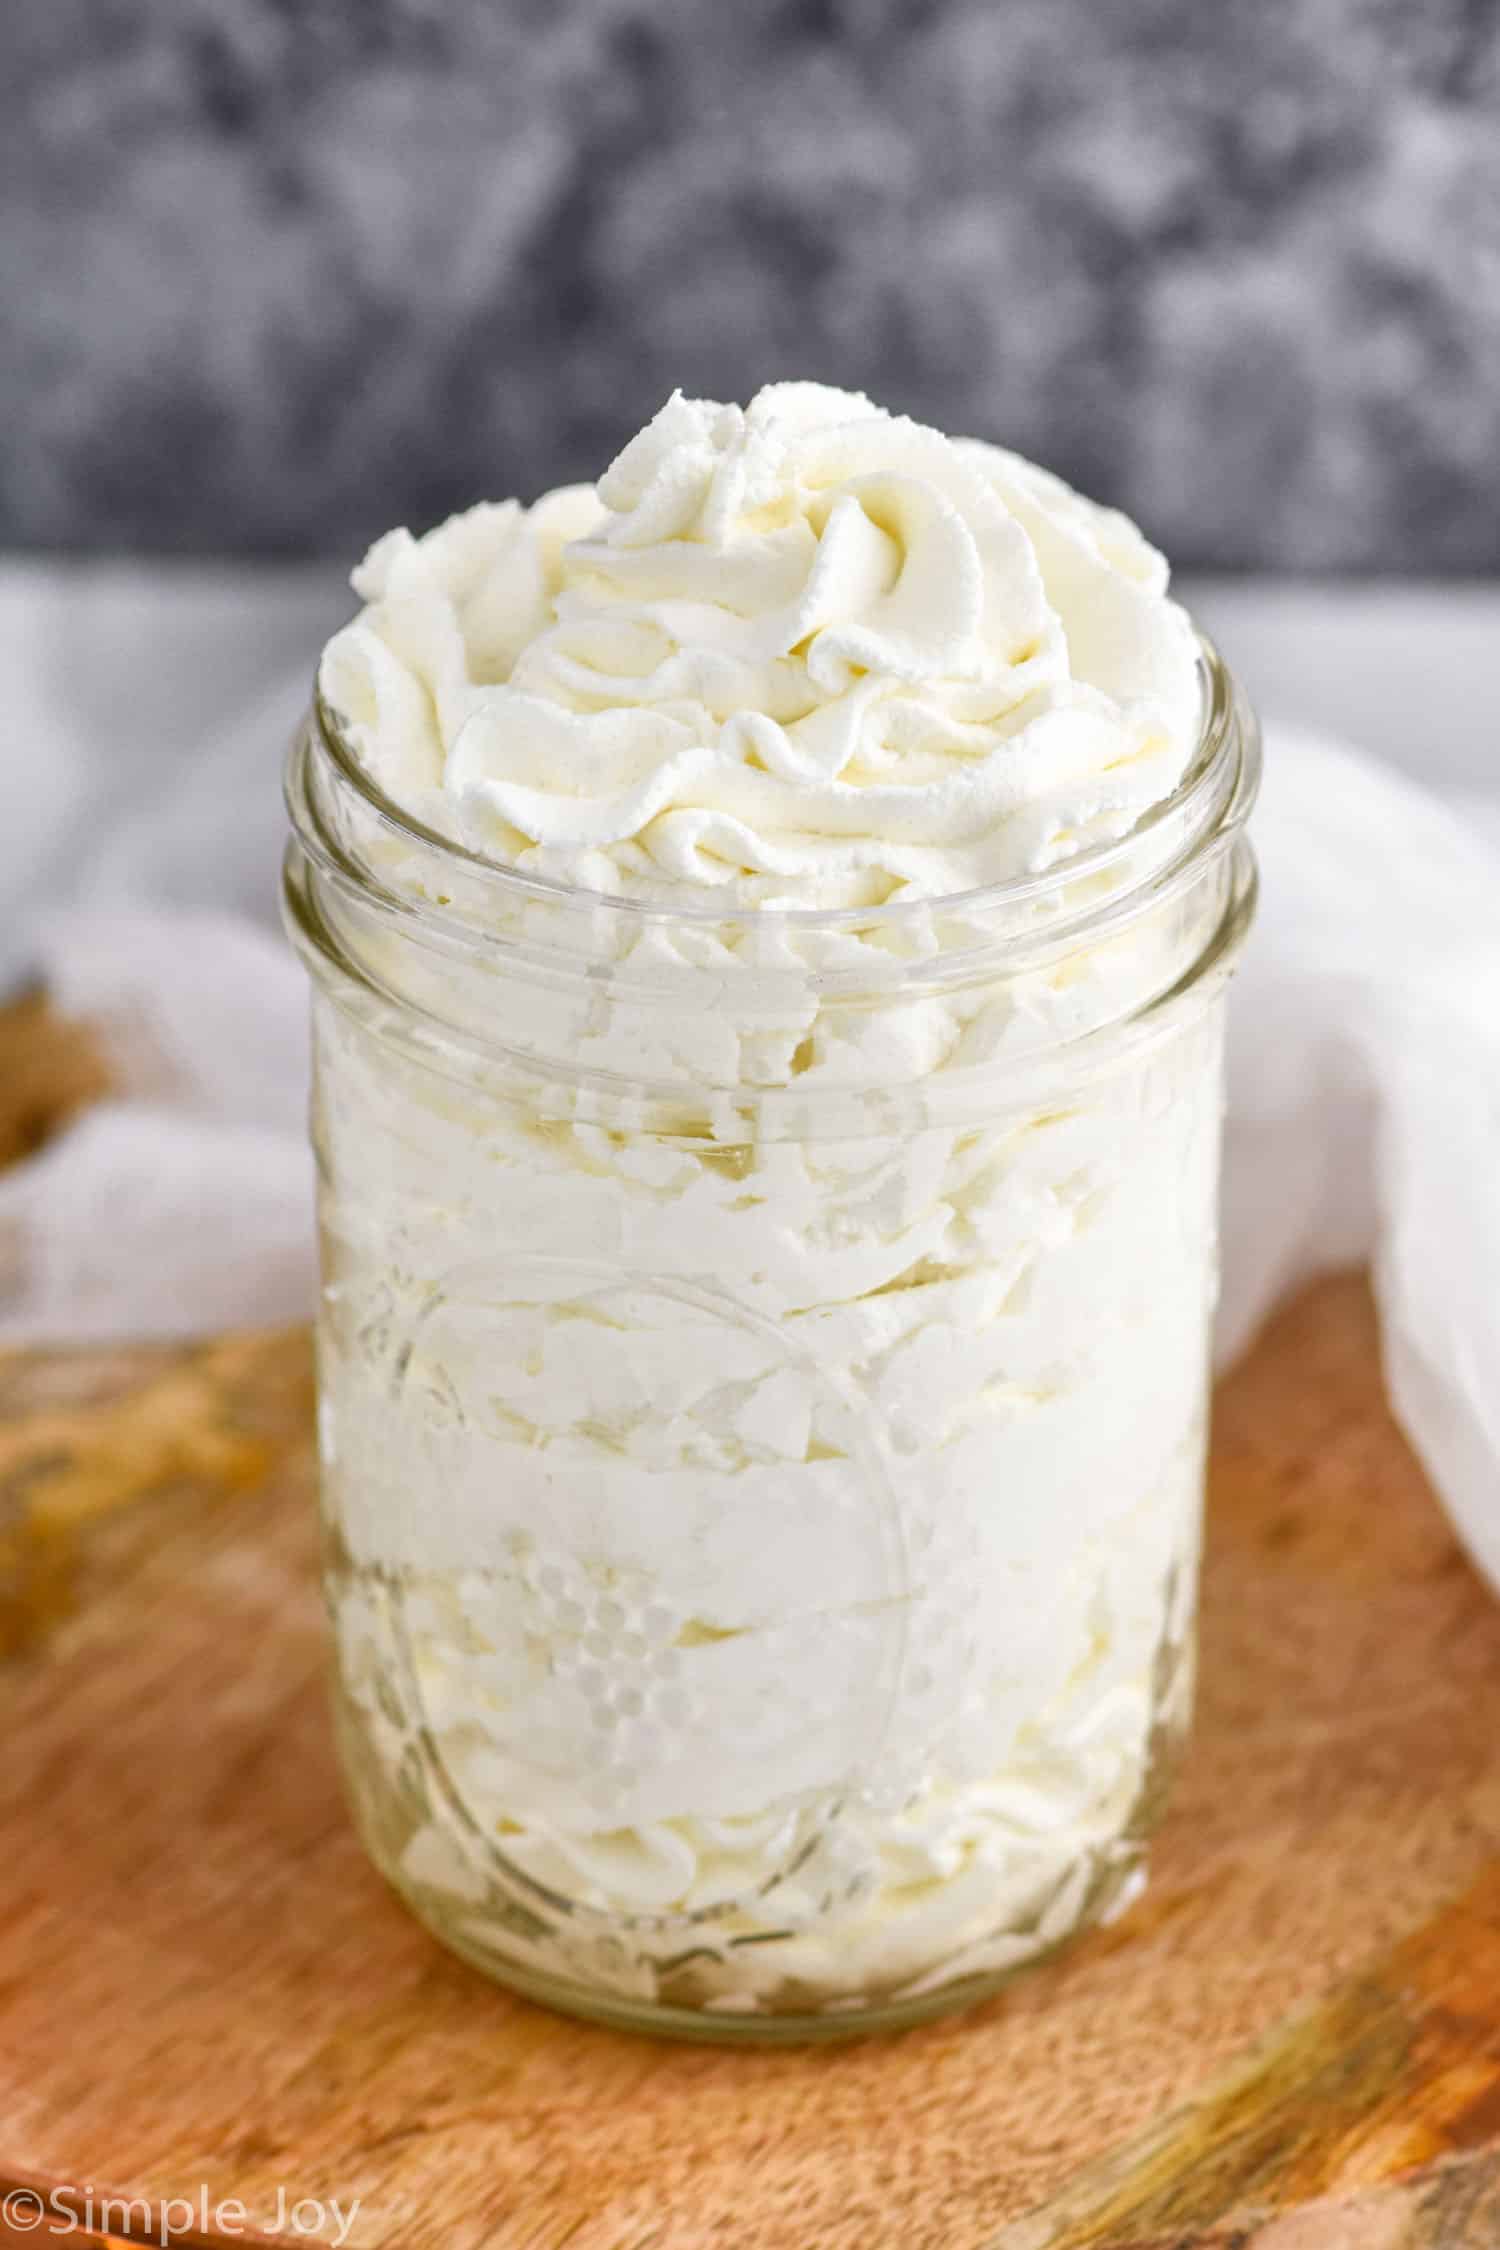 https://www.simplejoy.com/wp-content/uploads/2021/10/stabilized-whipped-cream-frosting.jpg